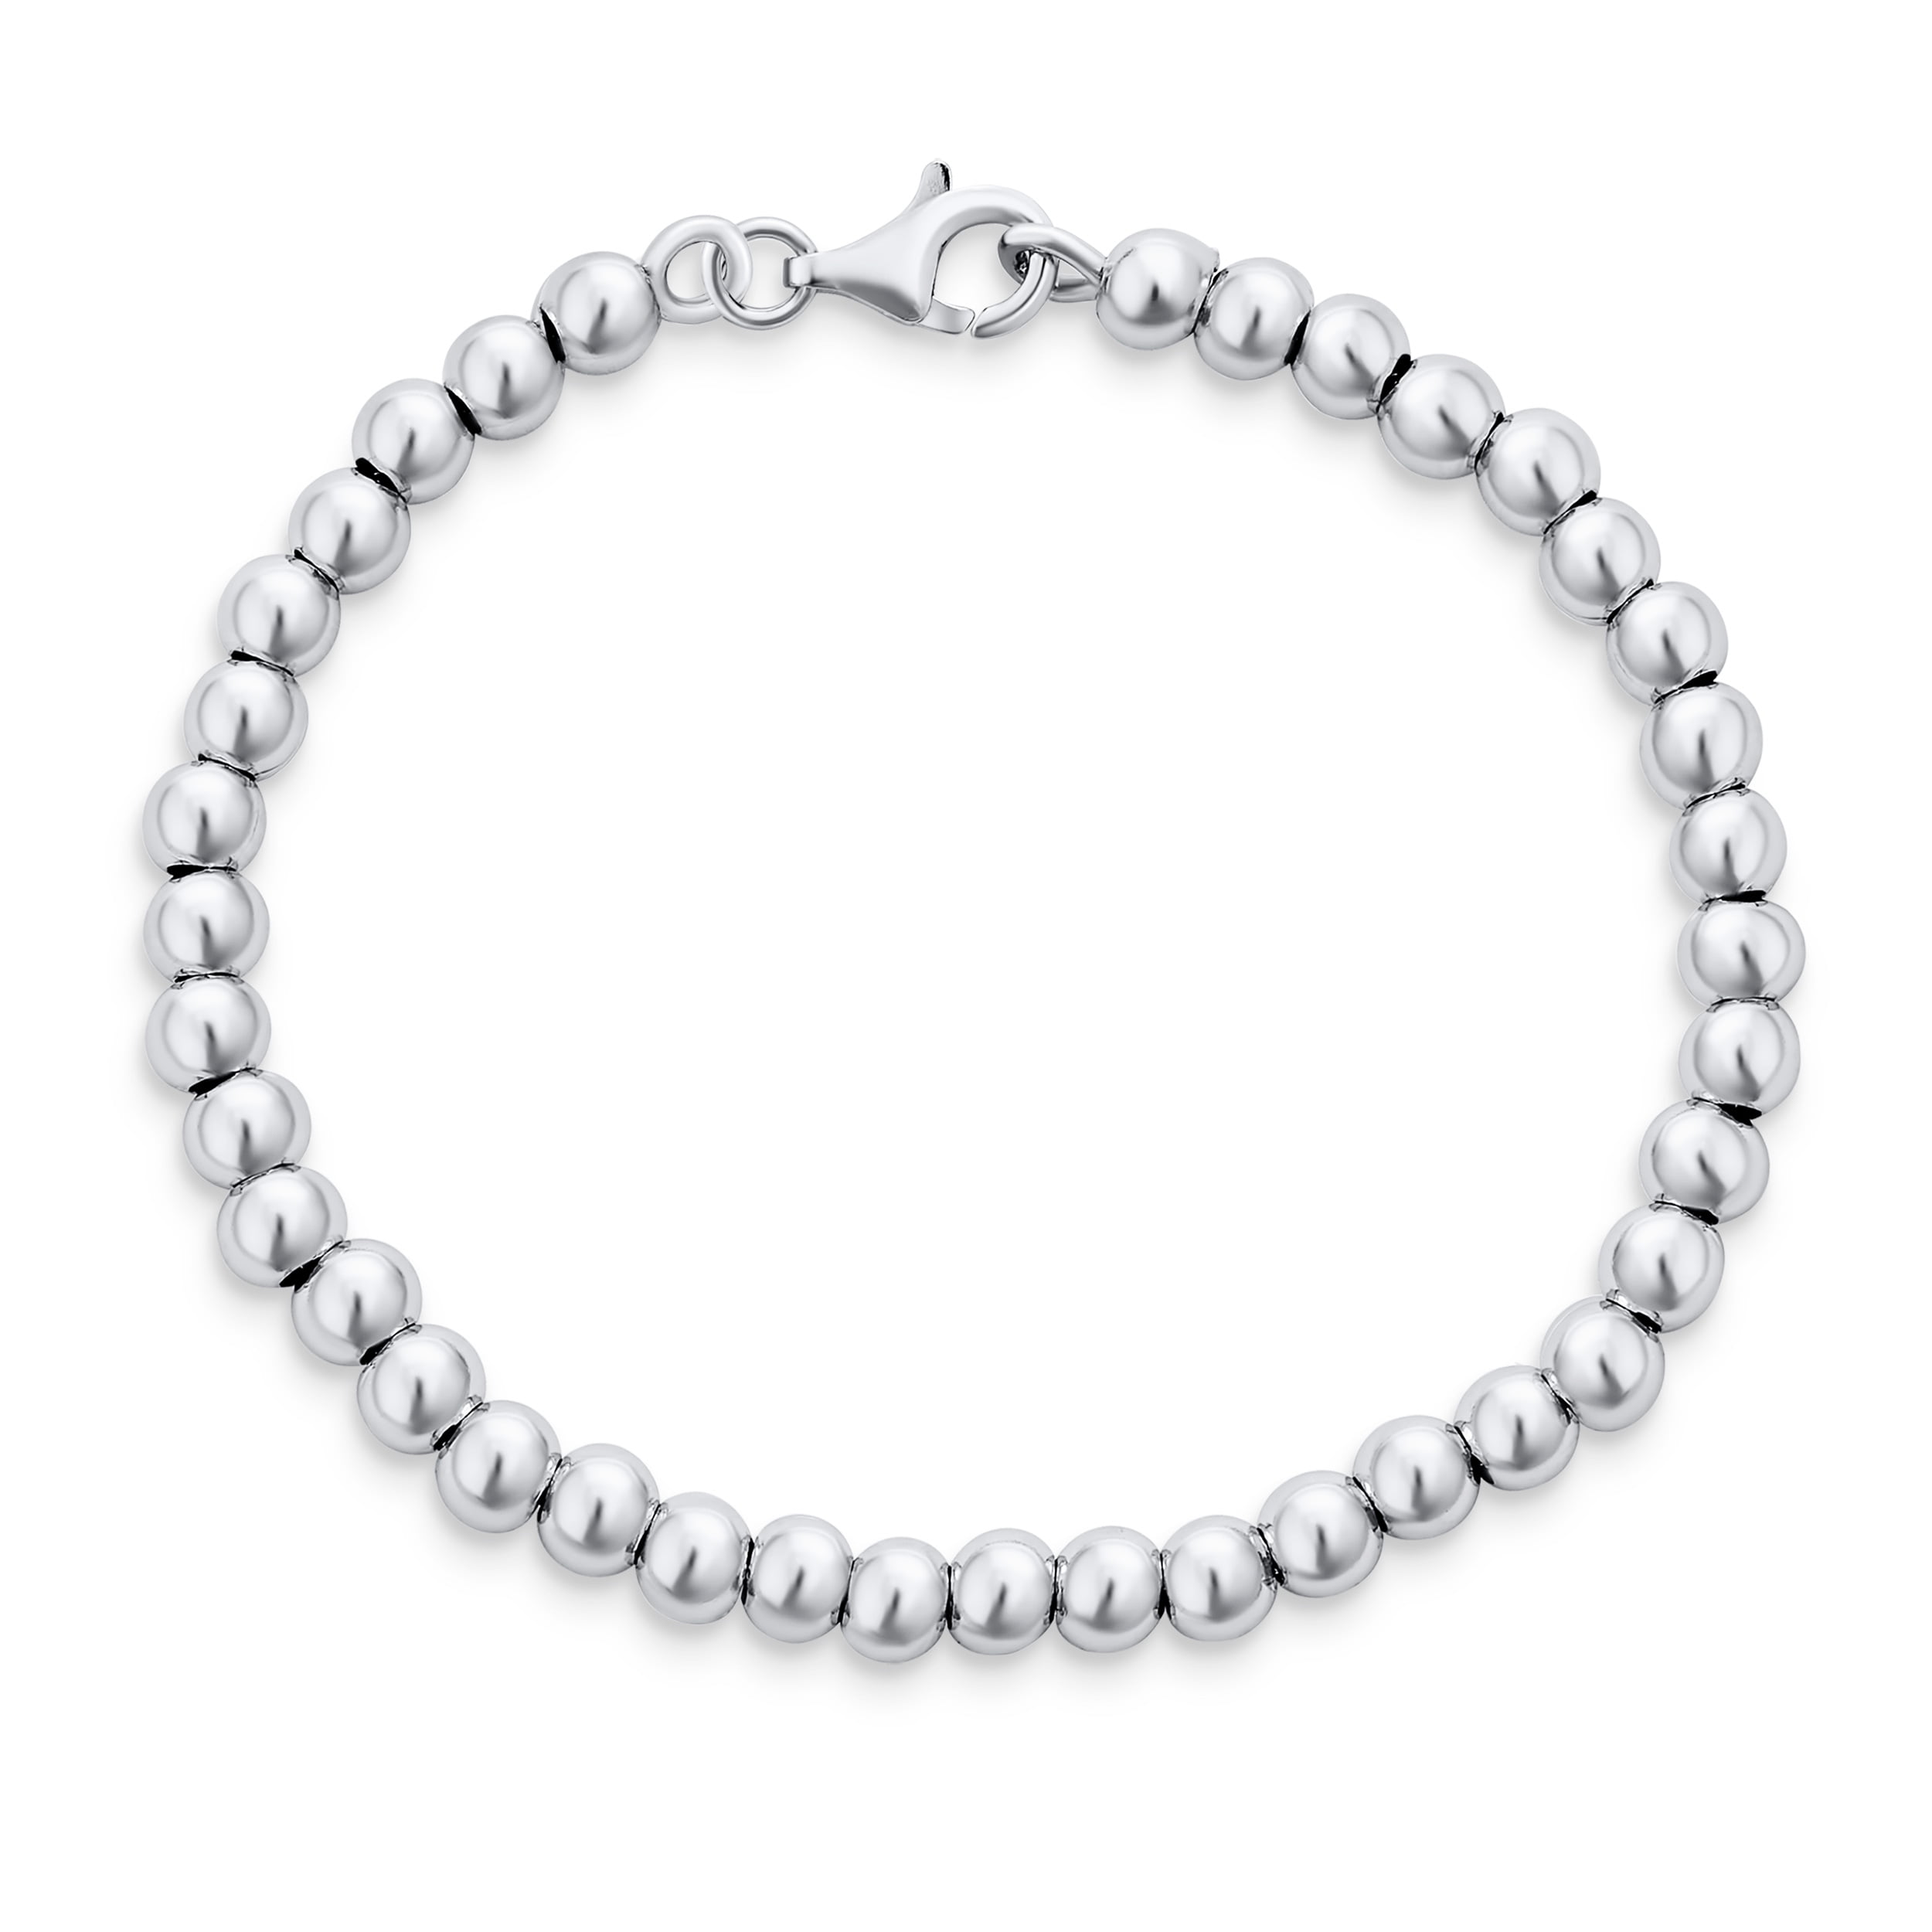 Kindness Adult Bracelet (5mm Beads) 6.5 Inches / Sterling Silver